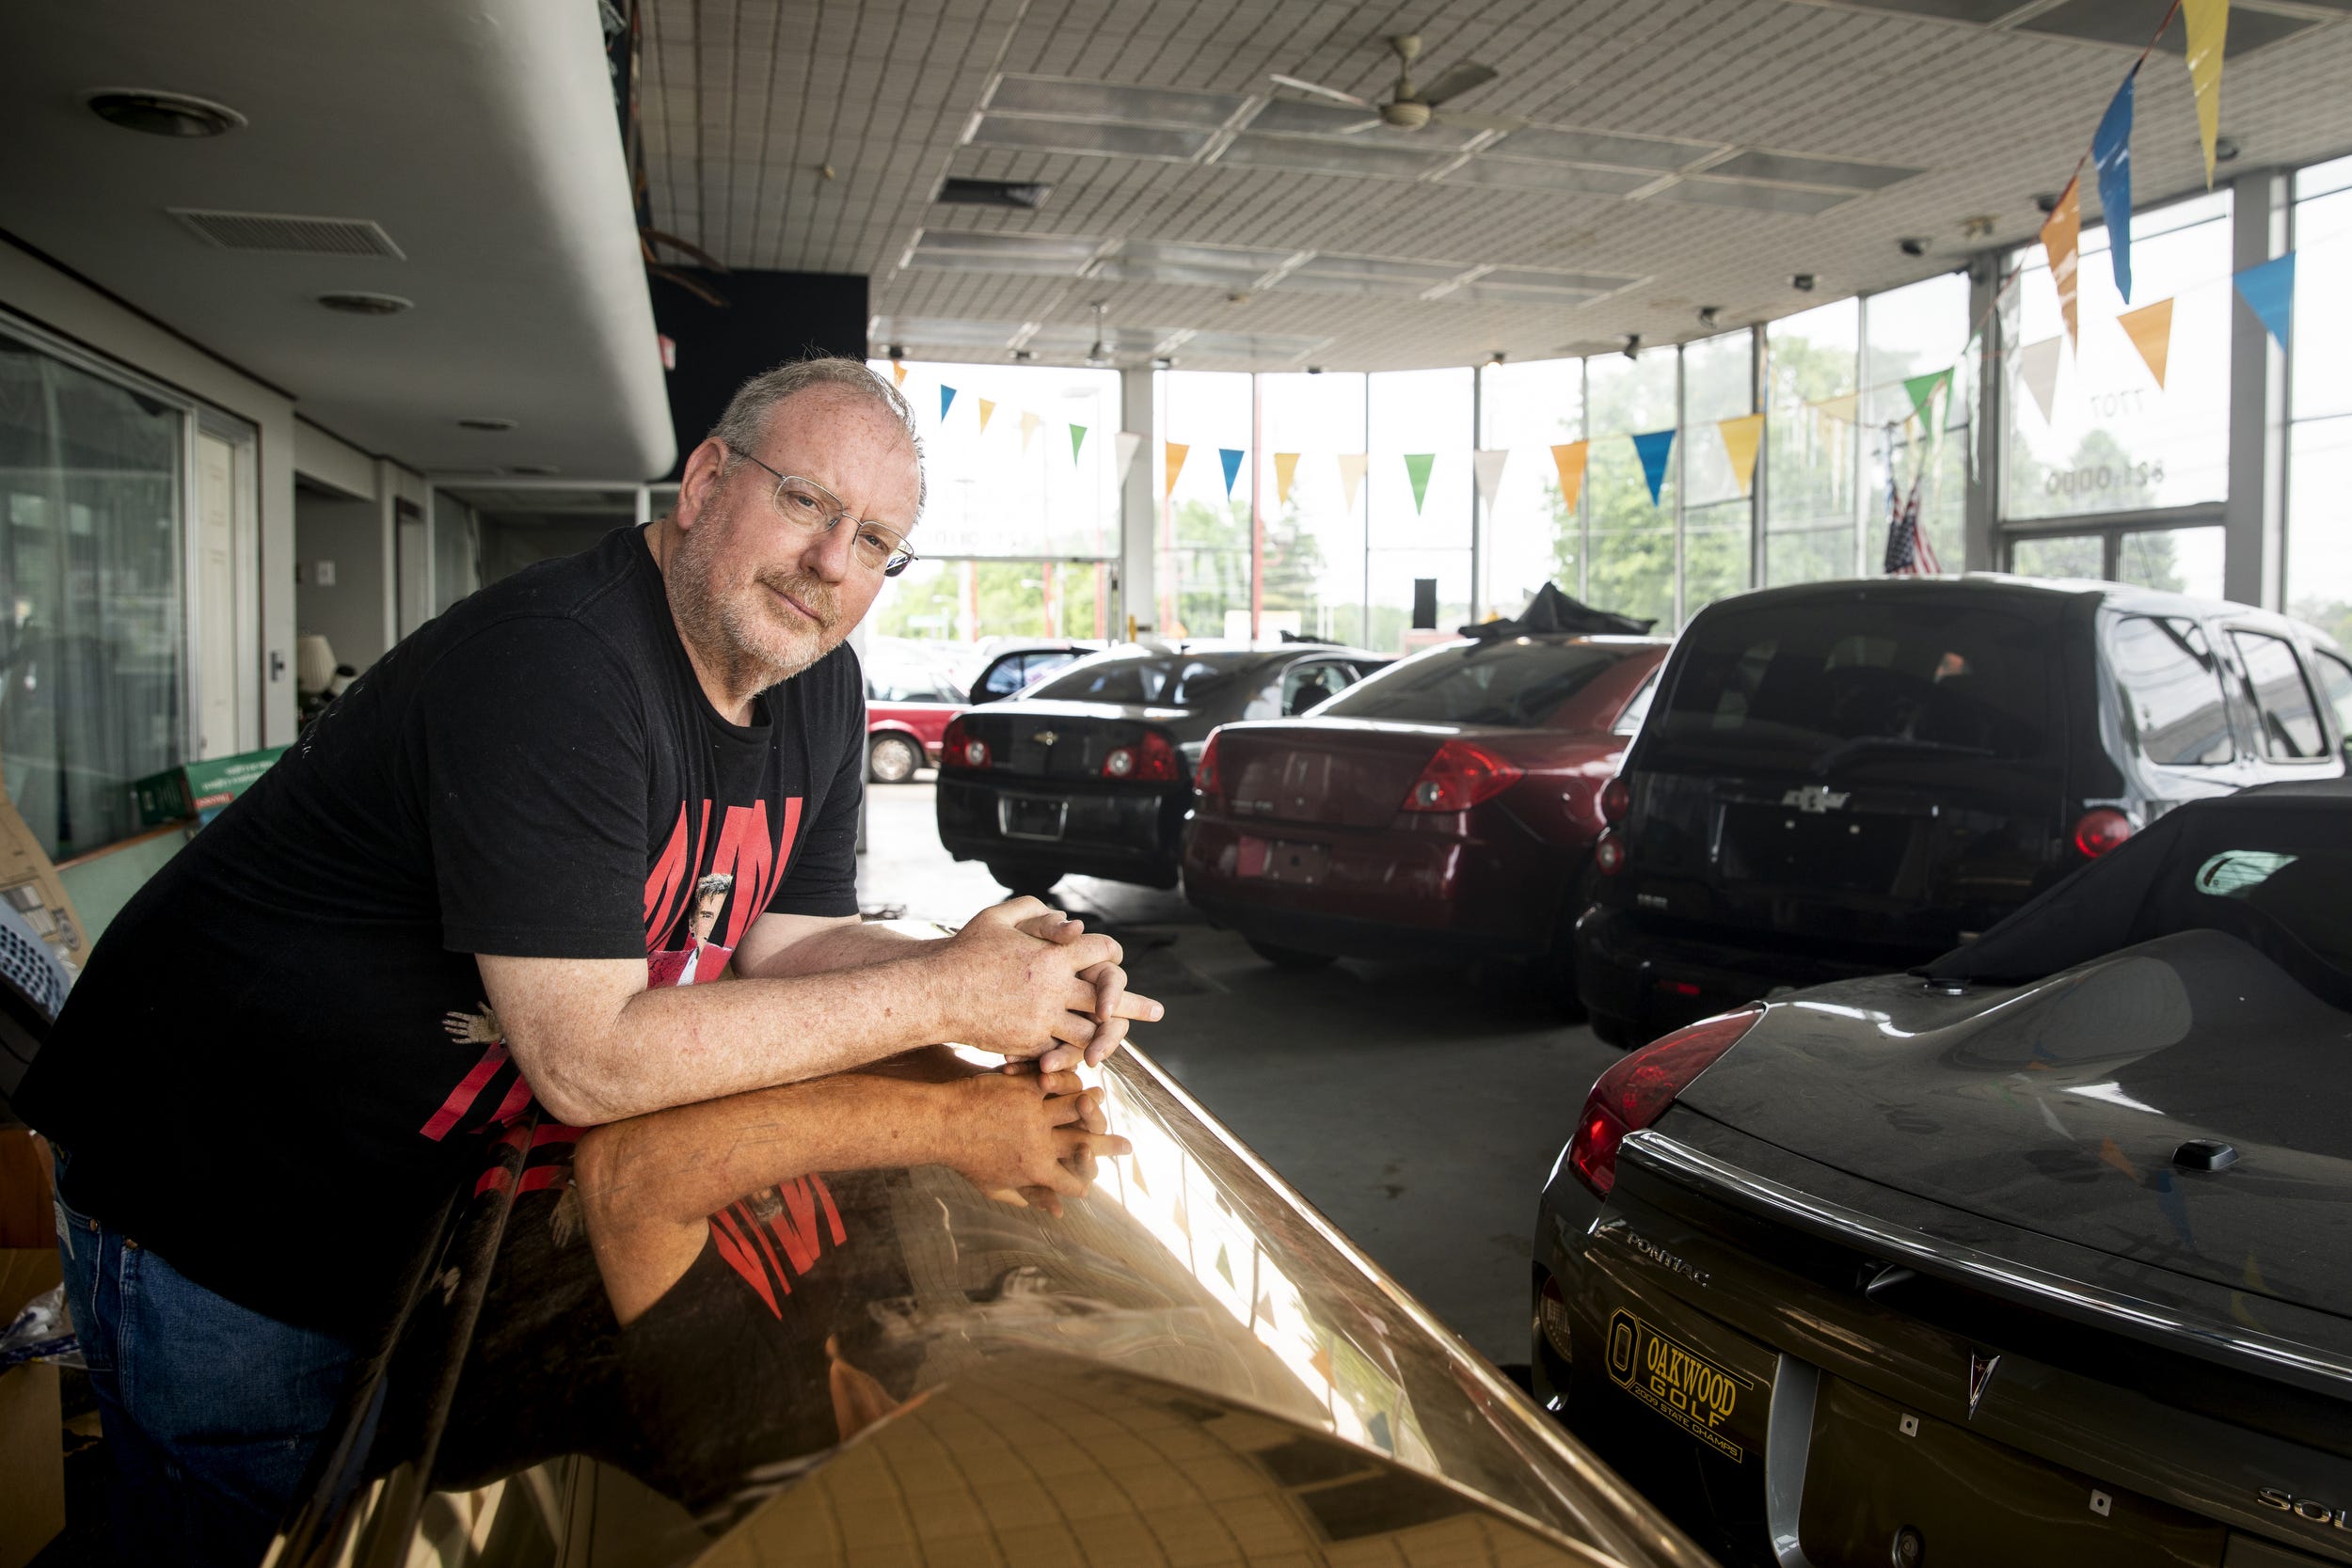 Carl Woerner, the owner of CW Coach Sales, sells hearses, limousines and other used cars on his 10-acre lot.